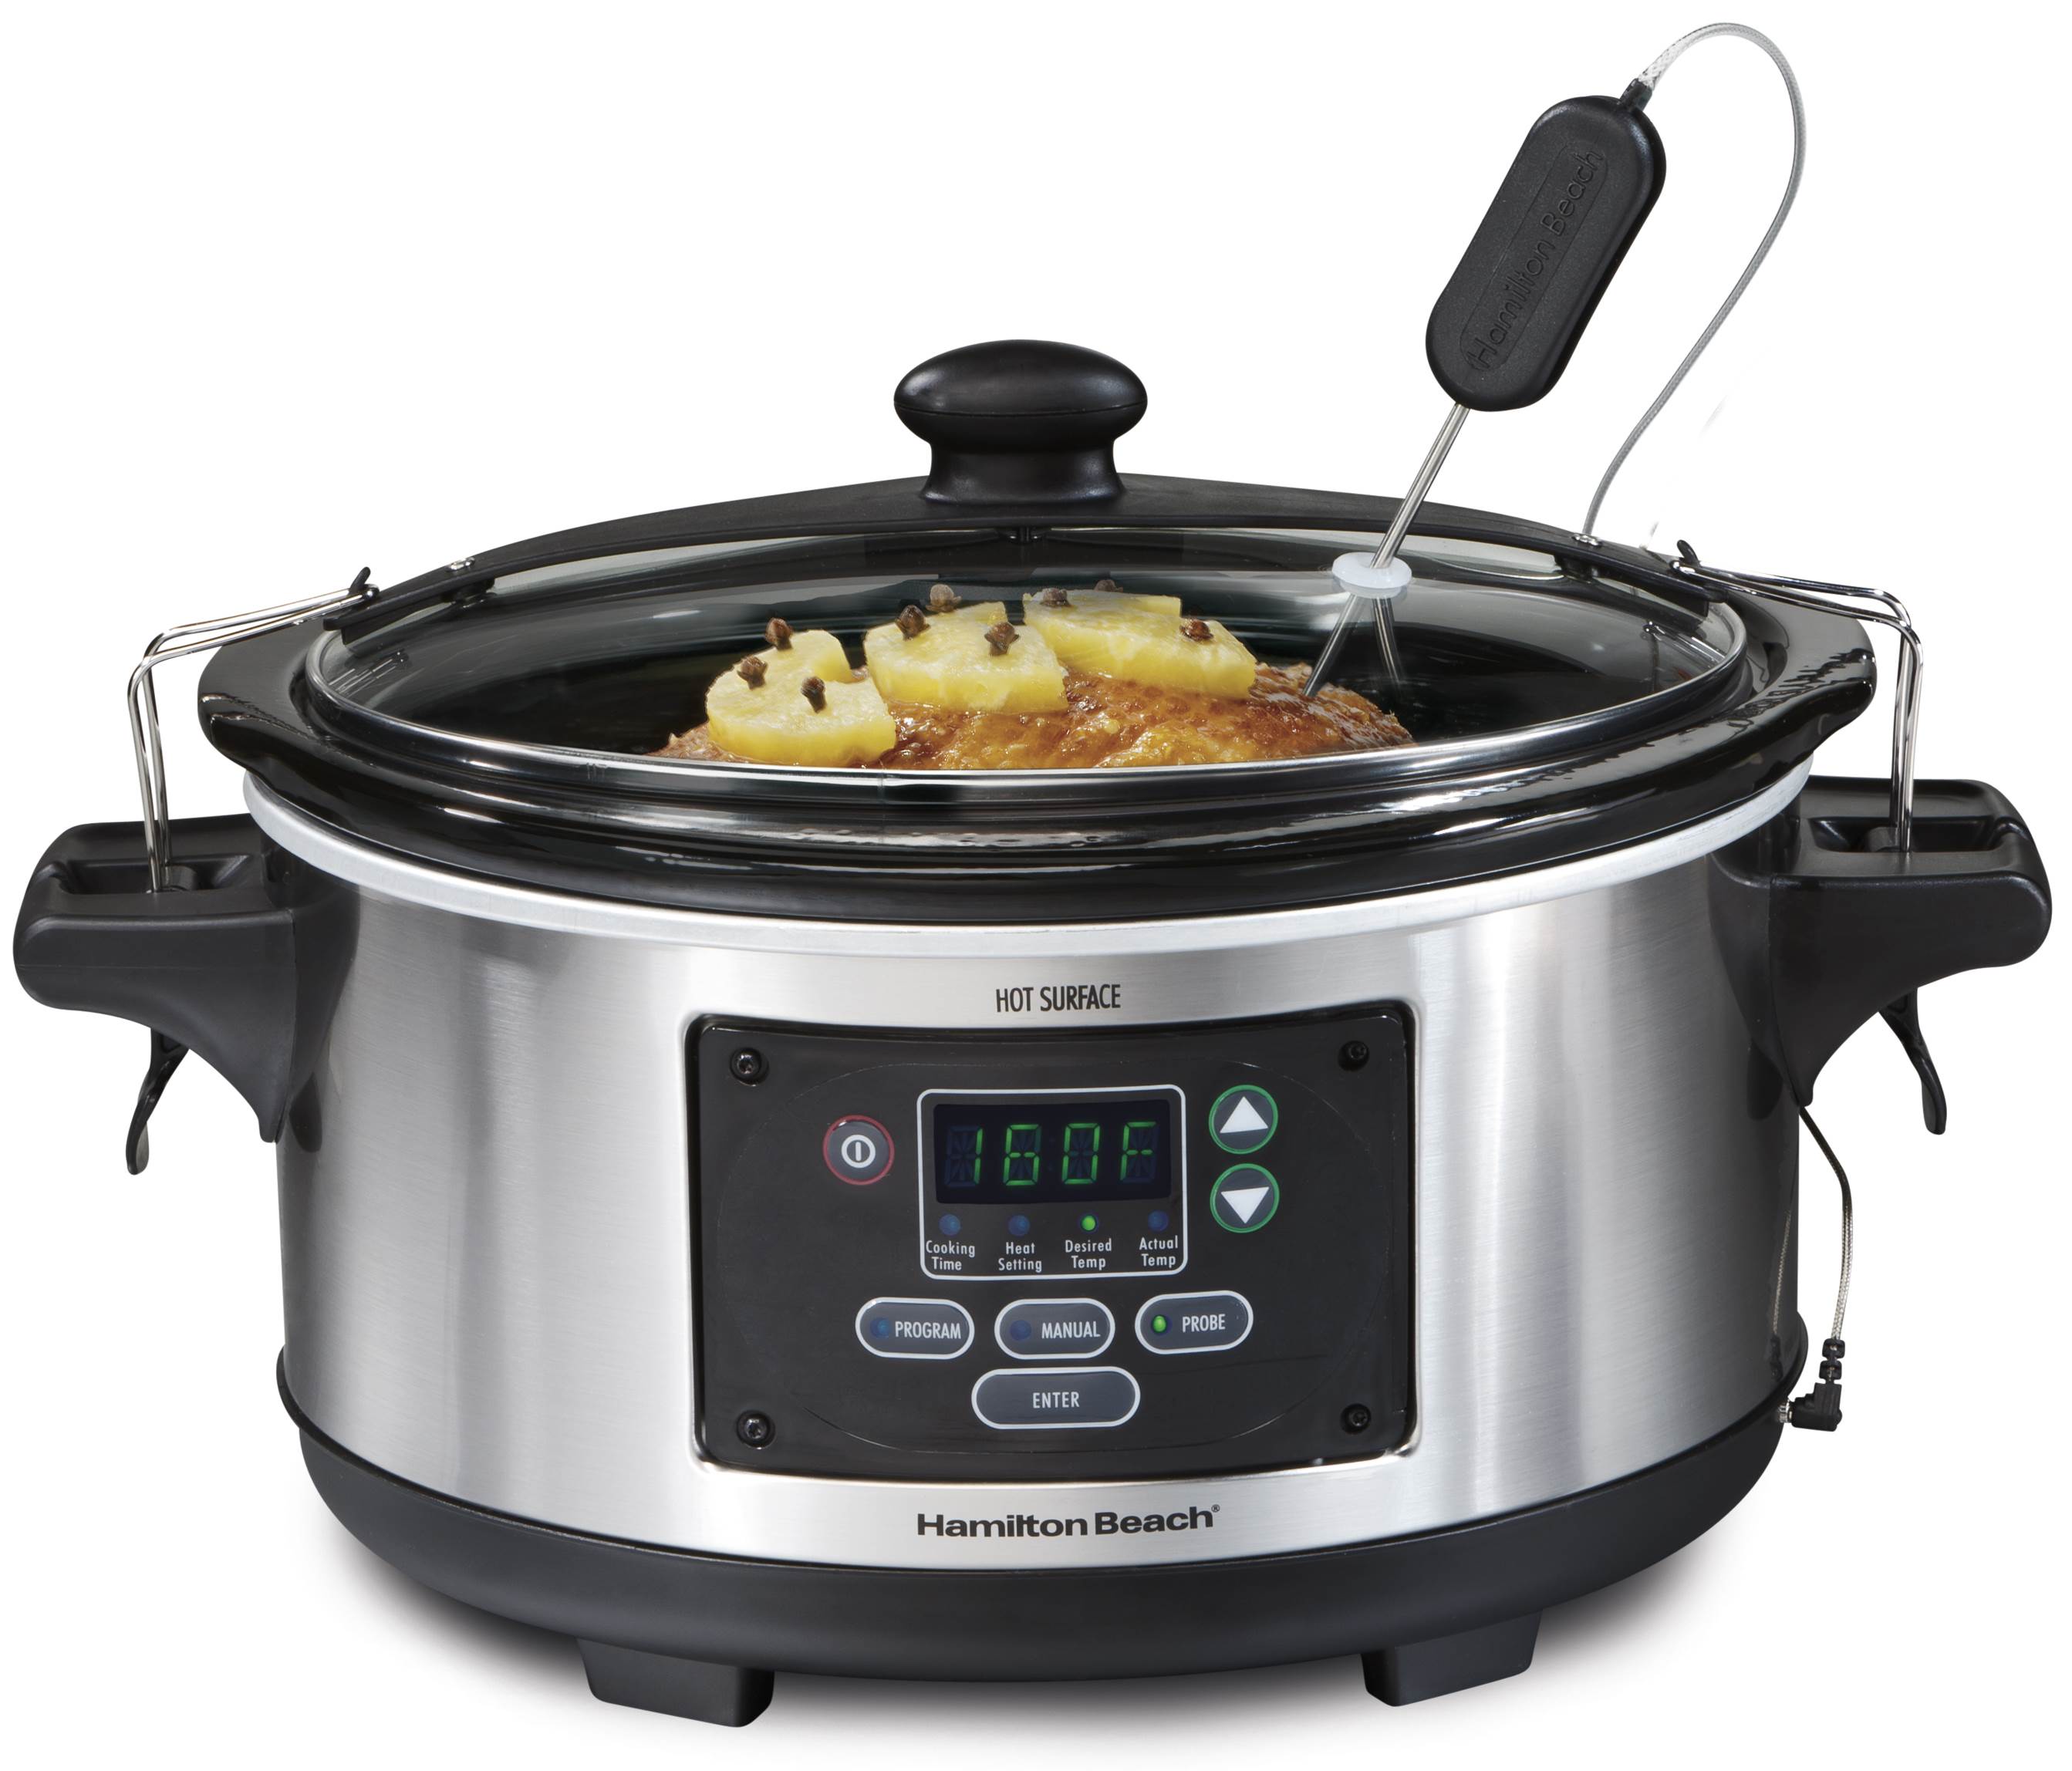 Hamilton Beach Set & Forget 6 qt. Brushed Metallic Programmable Slow Cooker - image 1 of 11